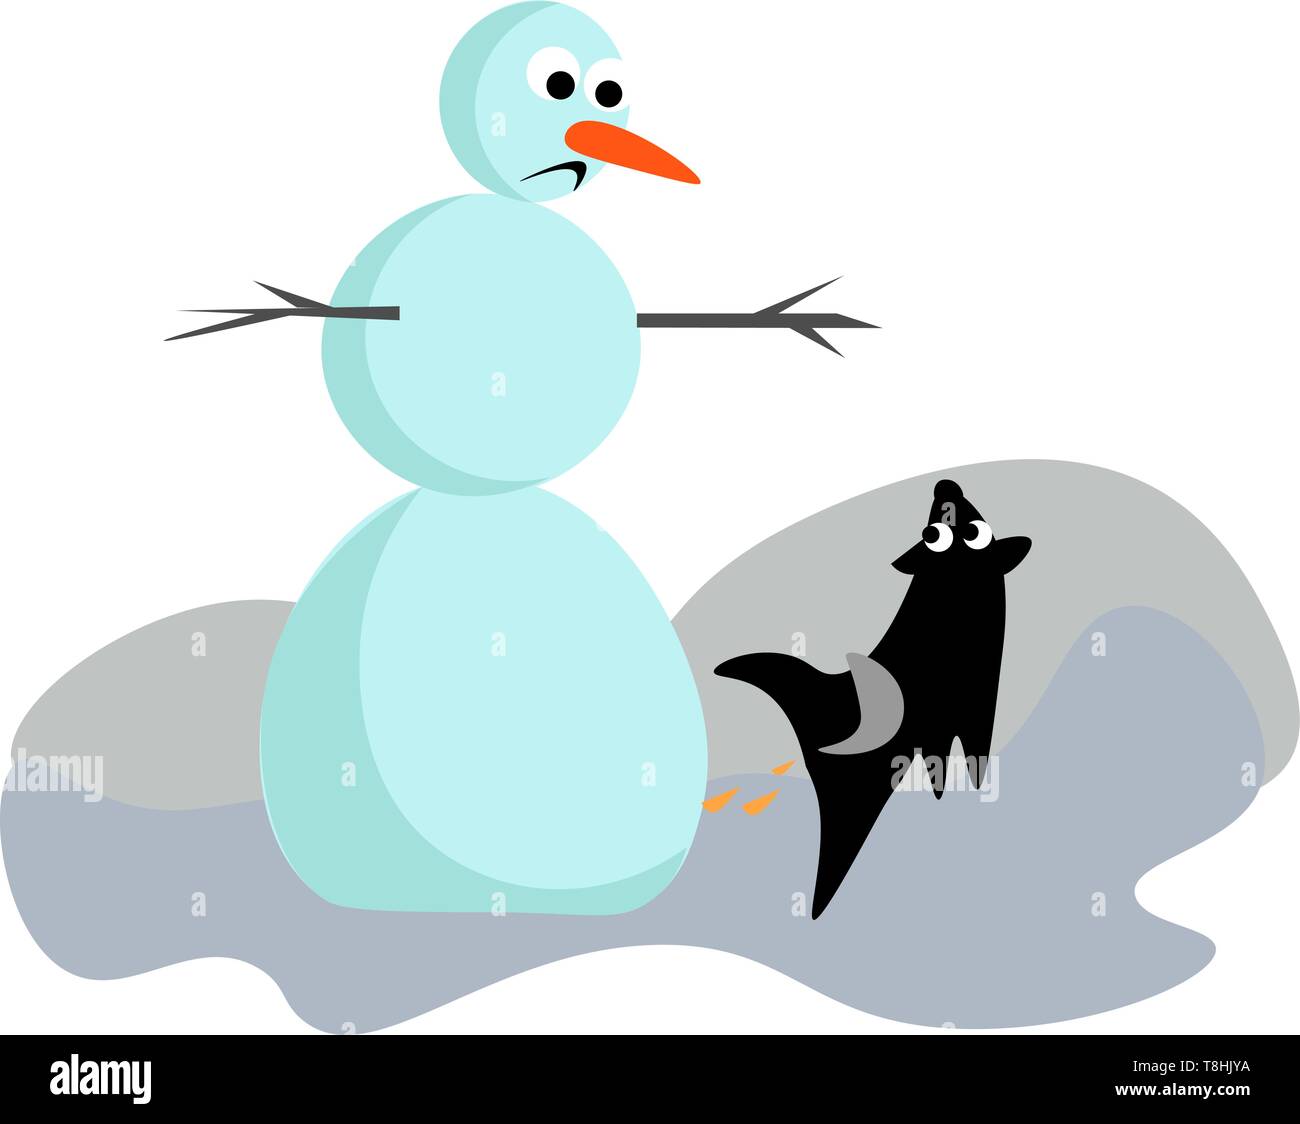 Clipart of a cute little snowman with three large balls of different sizes and a carrot for the nose looks sad while a black dog runs closer to it., v Stock Vector